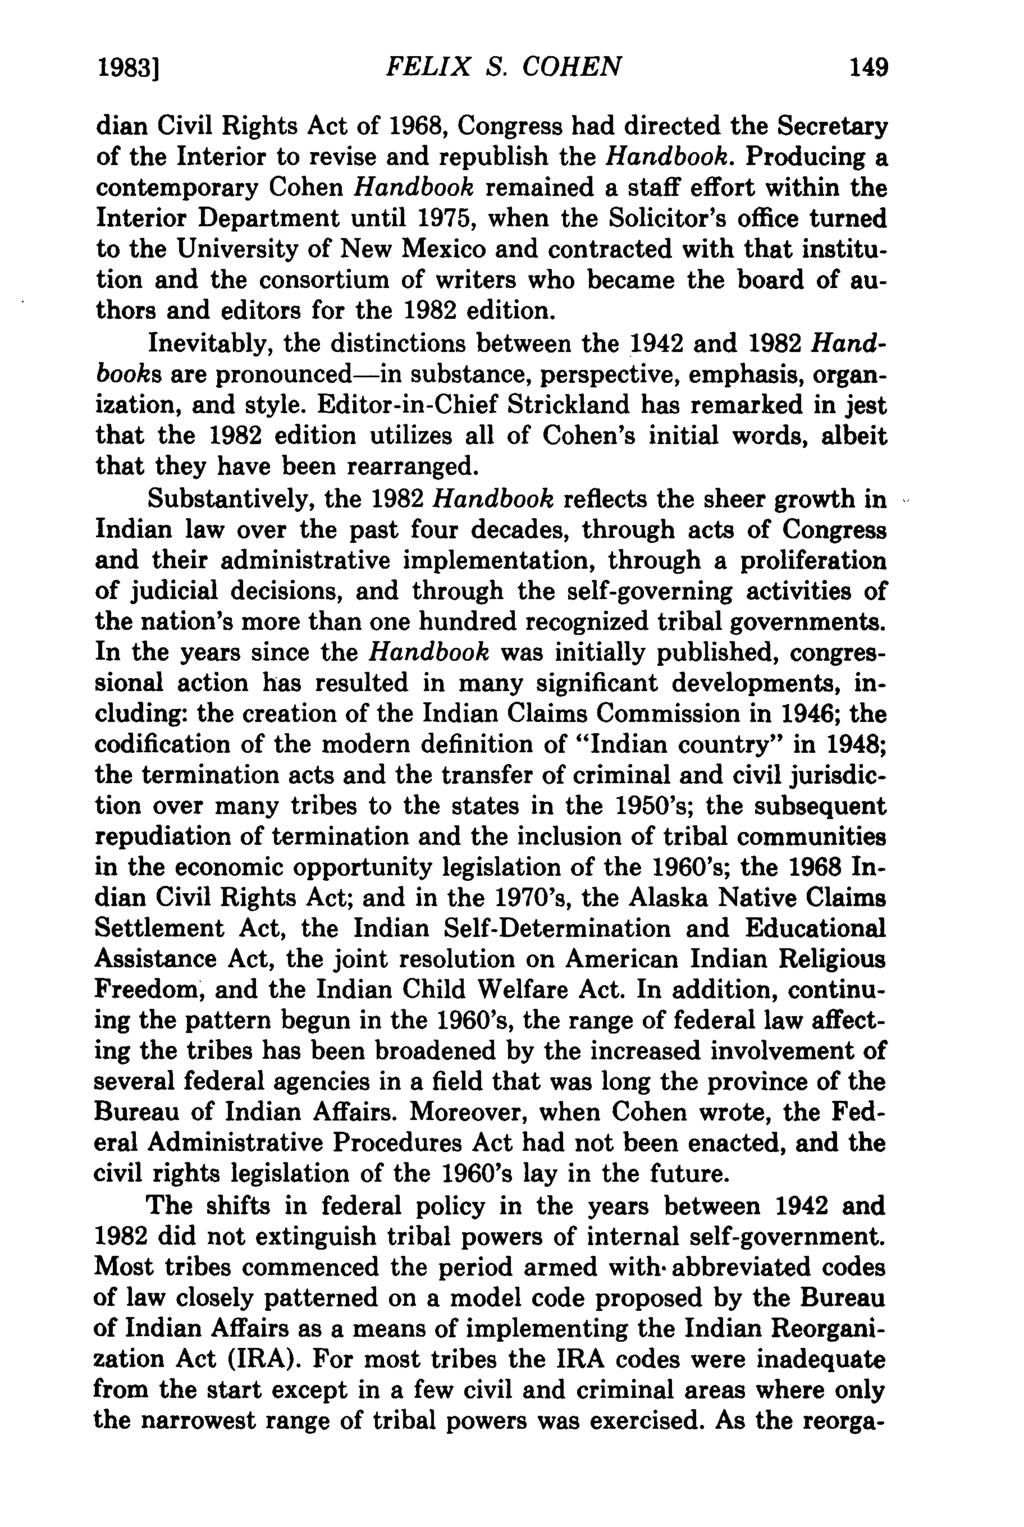 1983] FELIX Brown: Felix S. S. COHEN Cohen dian Civil Rights Act of 1968, Congress had directed the Secretary of the Interior to revise and republish the Handbook.